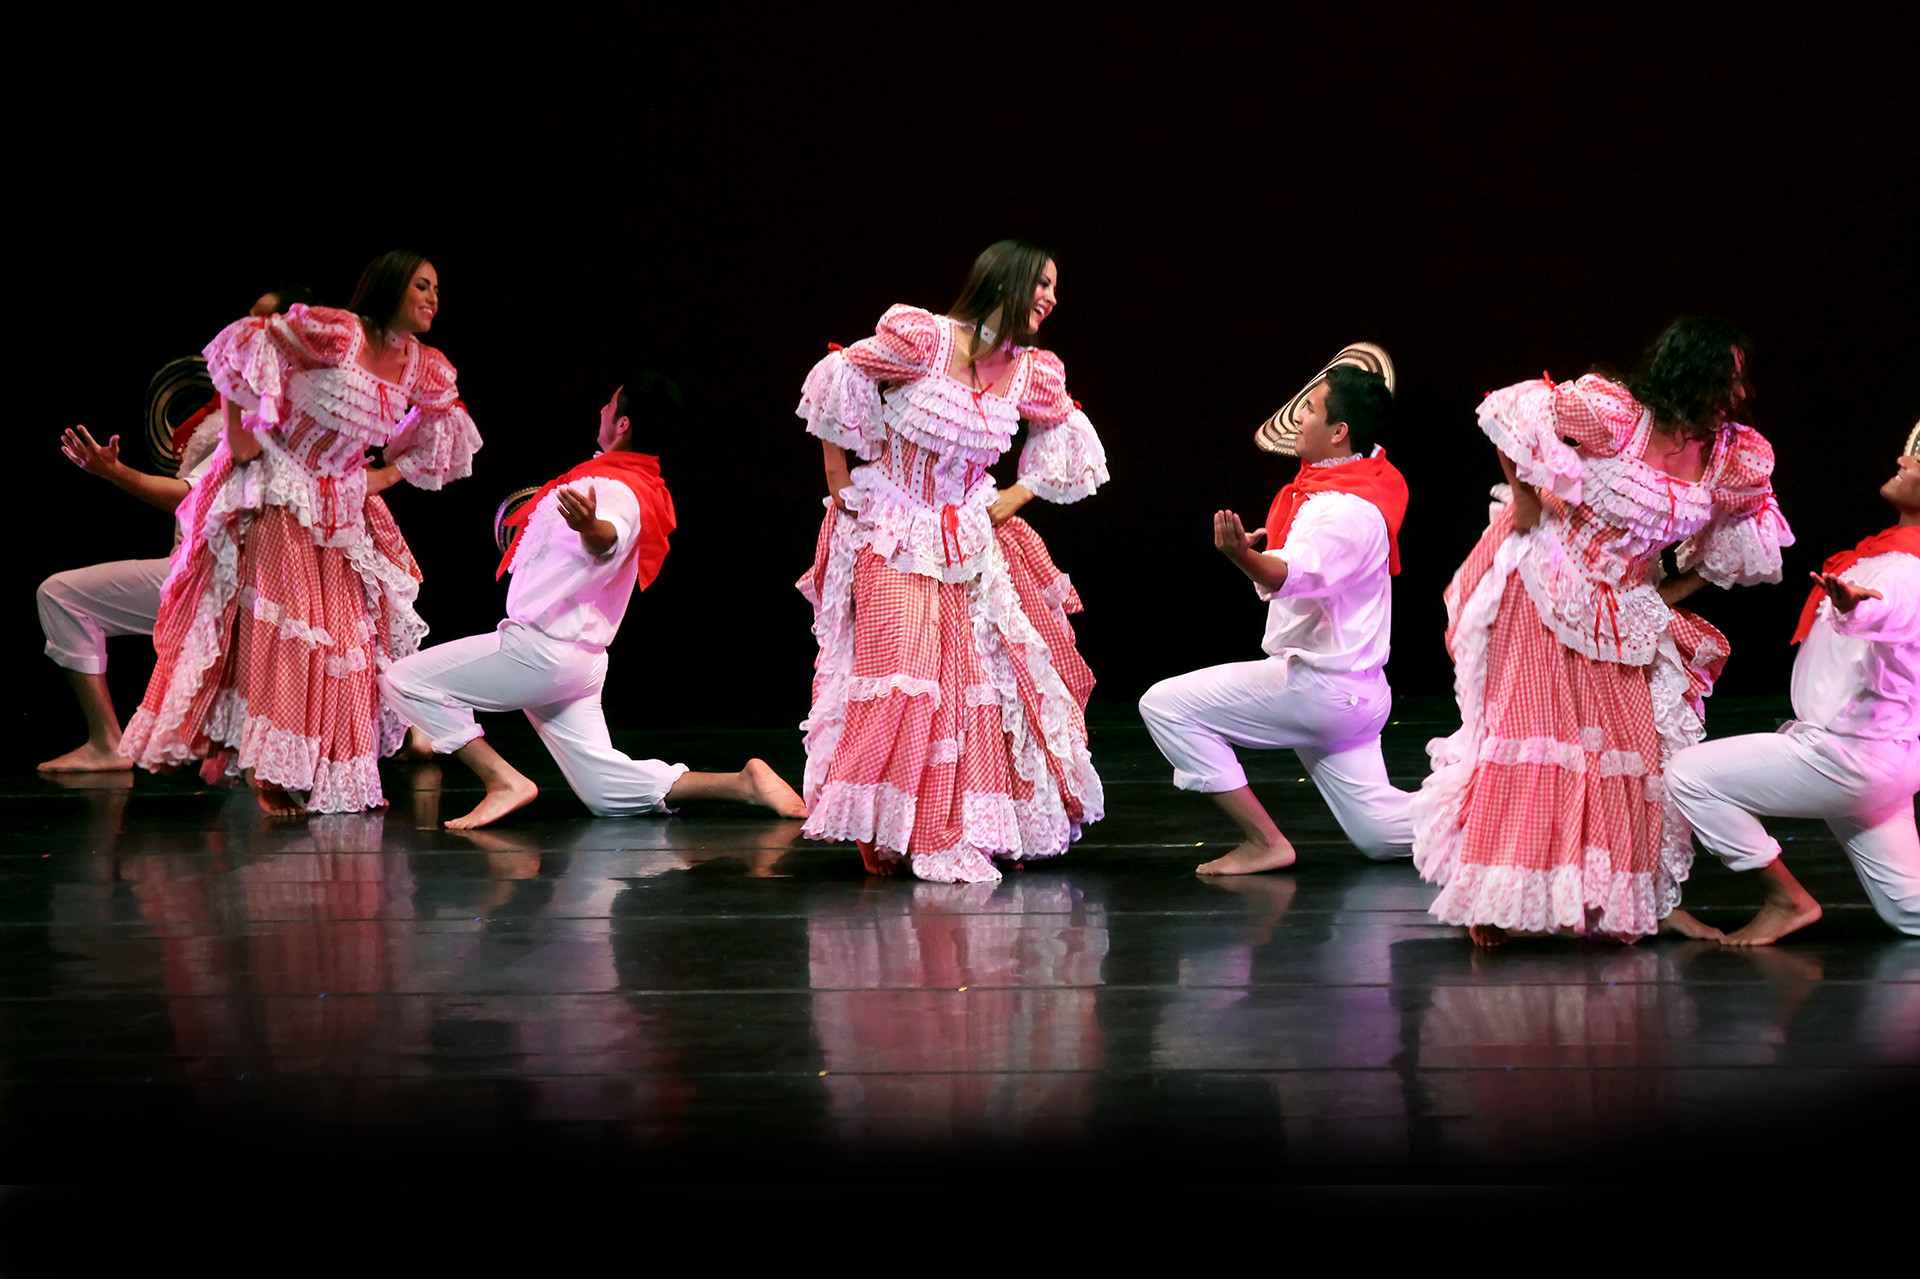 The Colombian Folkloric Ballet from Houston, Texas.